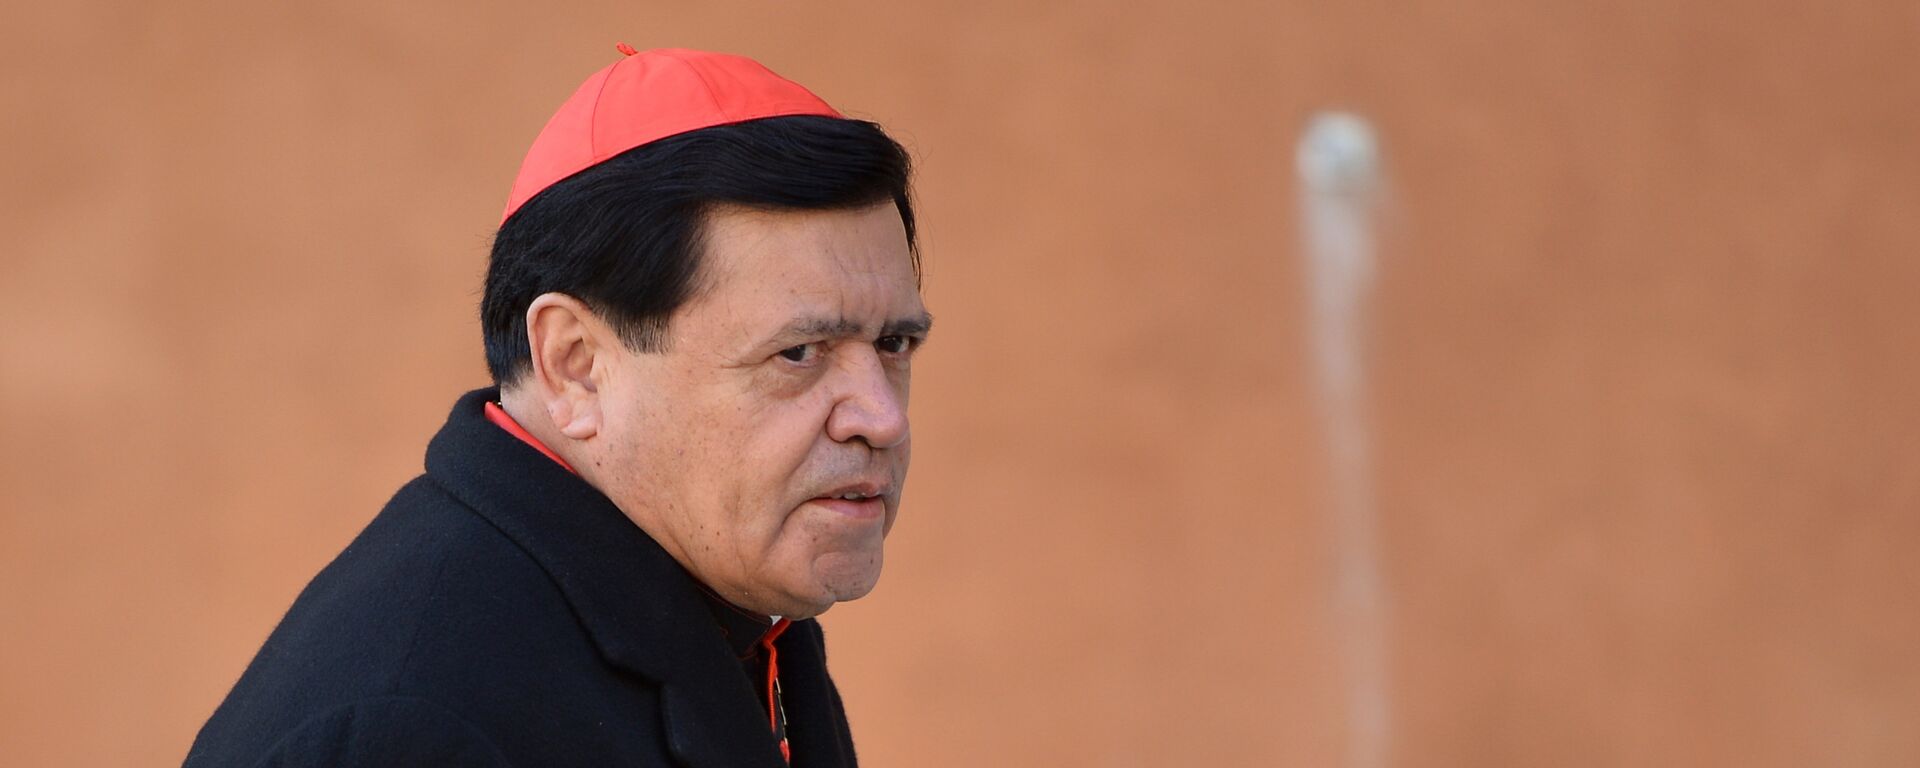 Mexican cardinal Norberto Rivera Carrera arrives for talks ahead of a conclave to elect a new pope on March 4, 2013 at the Vatican. - Sputnik Mundo, 1920, 23.11.2020